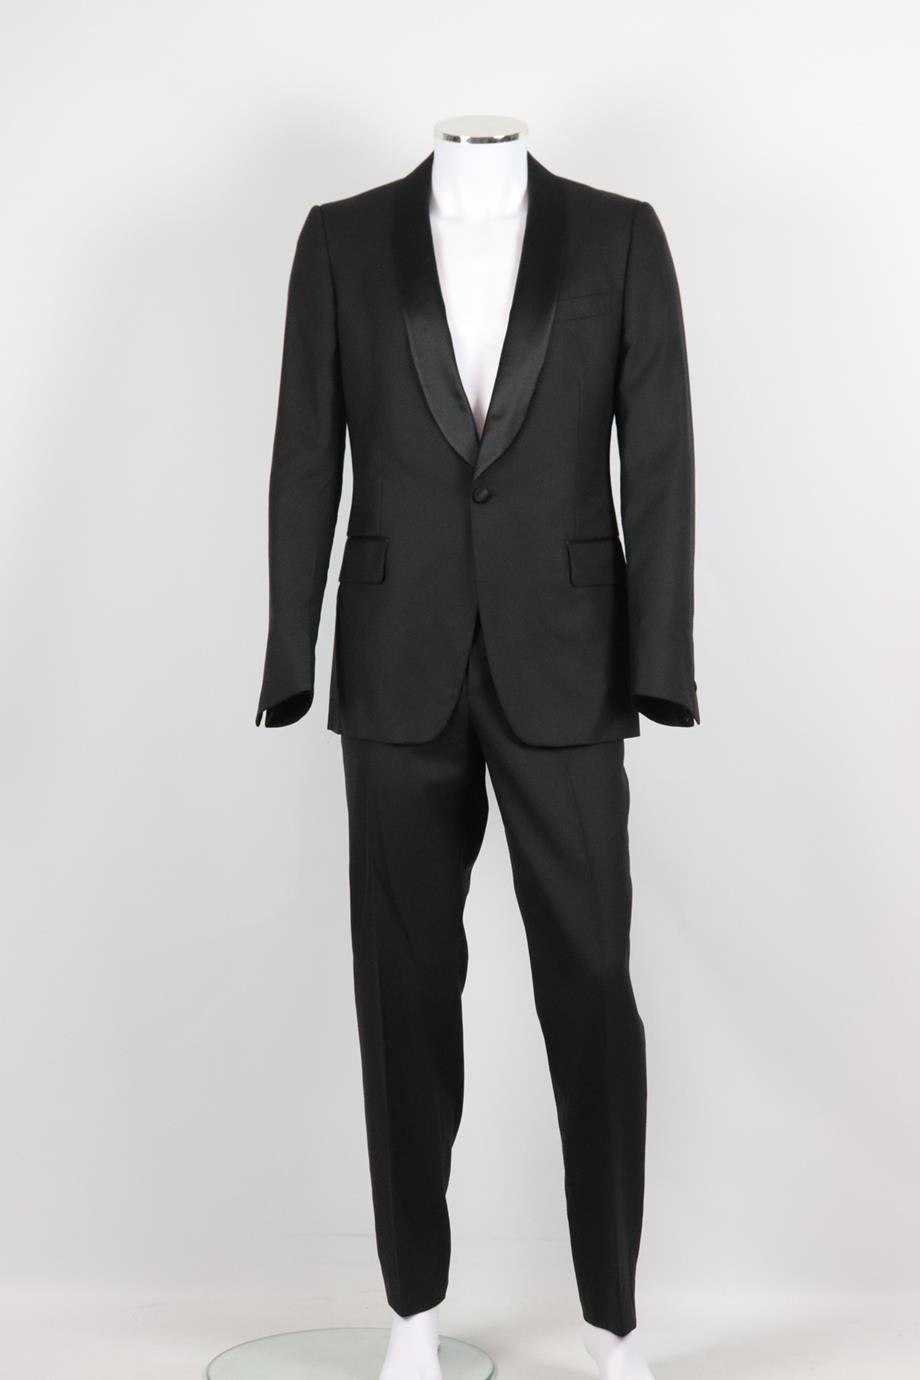 Yves Saint Laurent men's satin trimmed wool two piece suit. Black. Long sleeve, v-neck. Button fastening at front, hook and eye fastening at front. Jacket: 100% wool; lining: 100% silk. Pants: 100% viscose. Size: IT 50 (Large, EU 50, UK/US Chest 40)